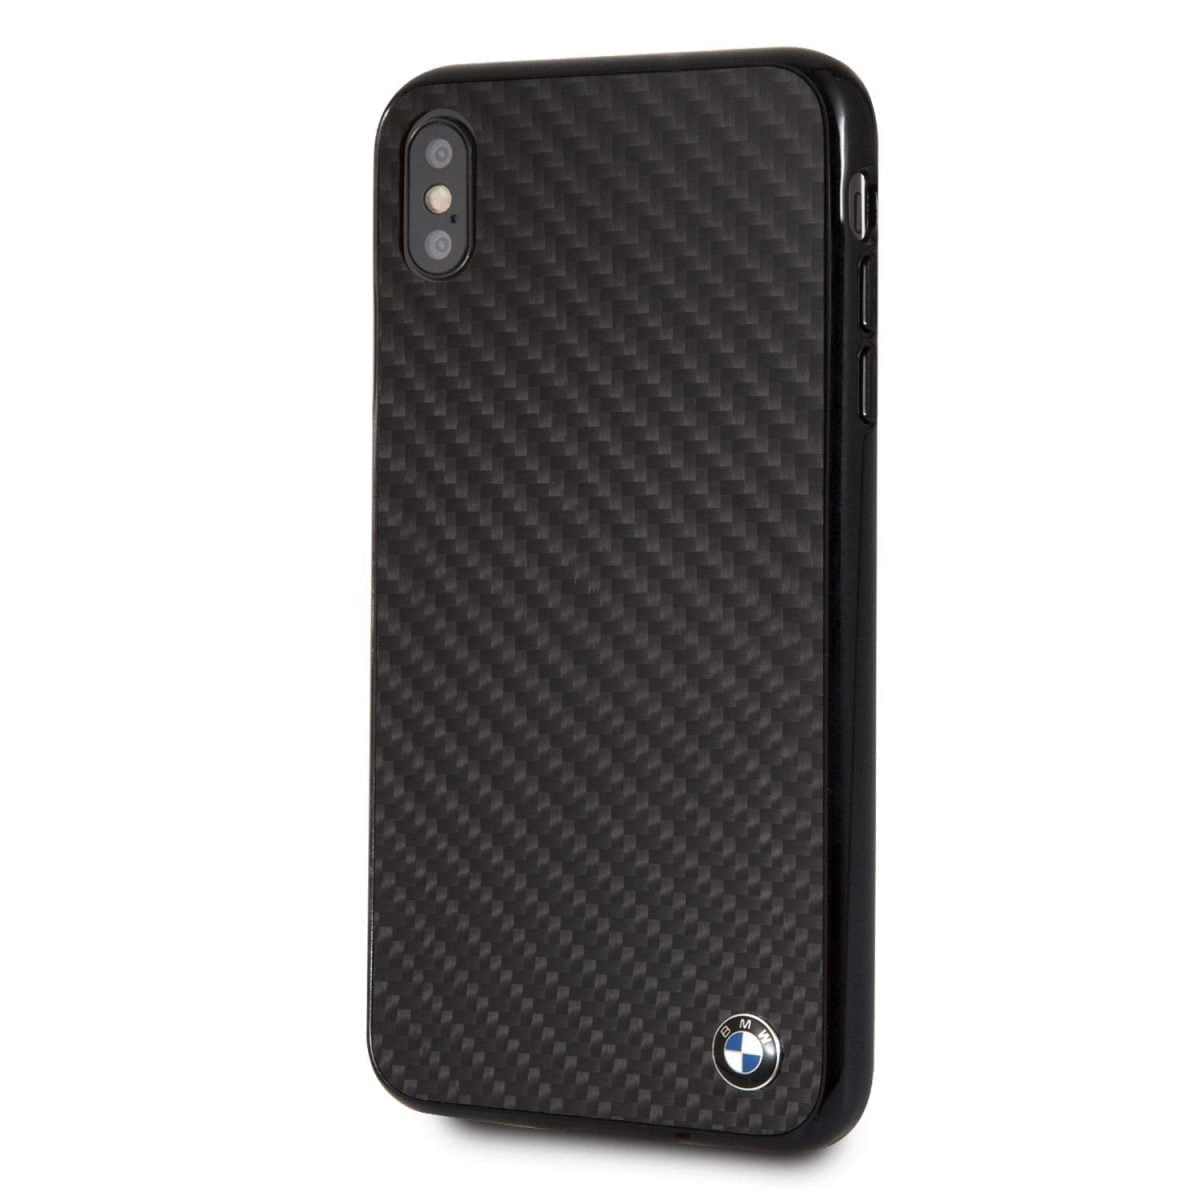 Cg Mobile Bmw Iphone Xs Max Case Black Carbon Hard Cell Phone Case Carbon Fiber Easily Accessible Ports Officially Licensed 01 Iphone Case Iphone Xs Black Carbon Fiber (Bmw)